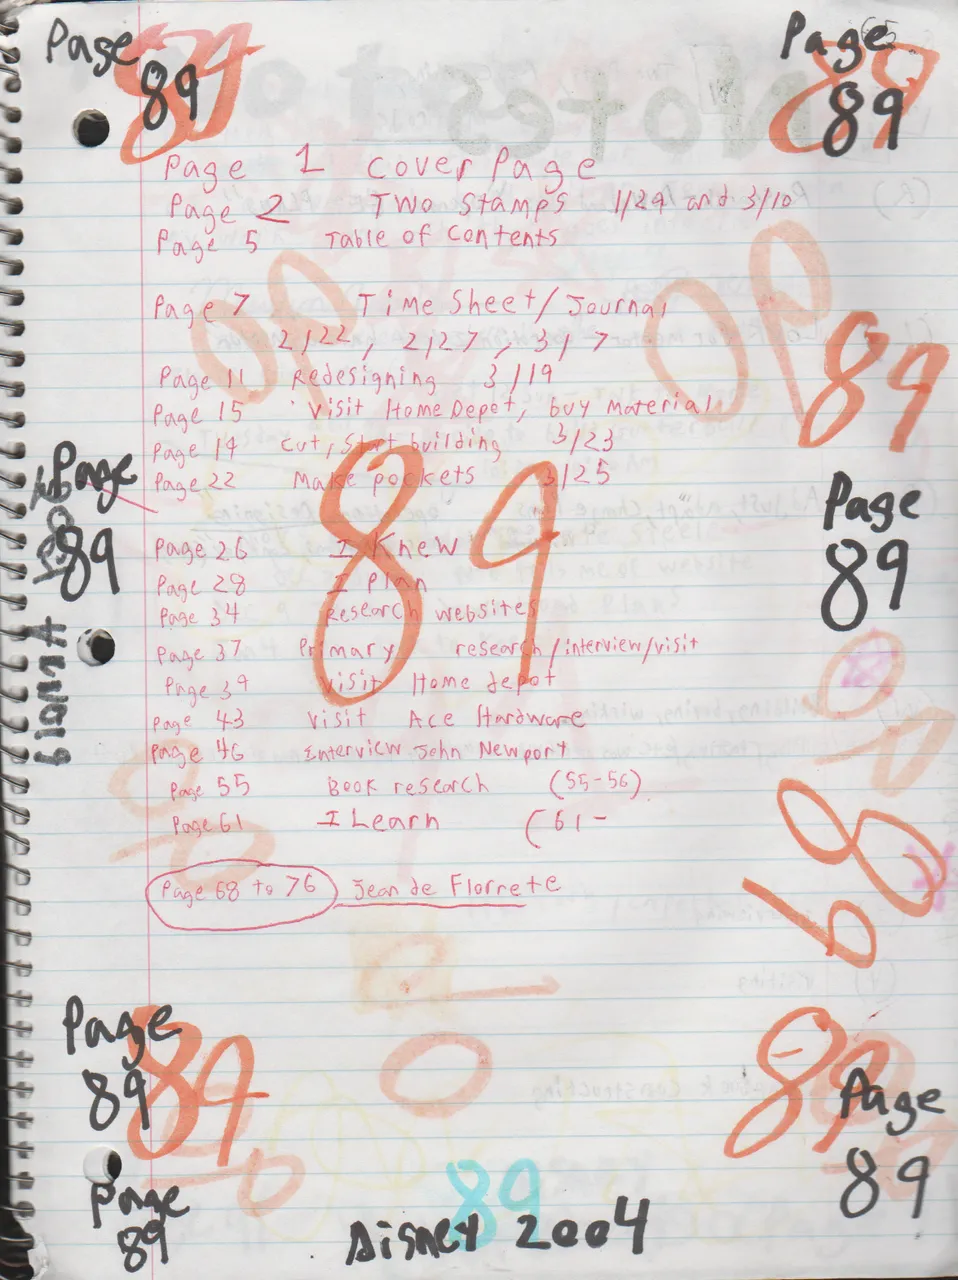 2004-01-29 - Thursday - Carpetball FGHS Senior Project Journal, Joey Arnold, Part 02, 96pages numbered, Notebook-87.png